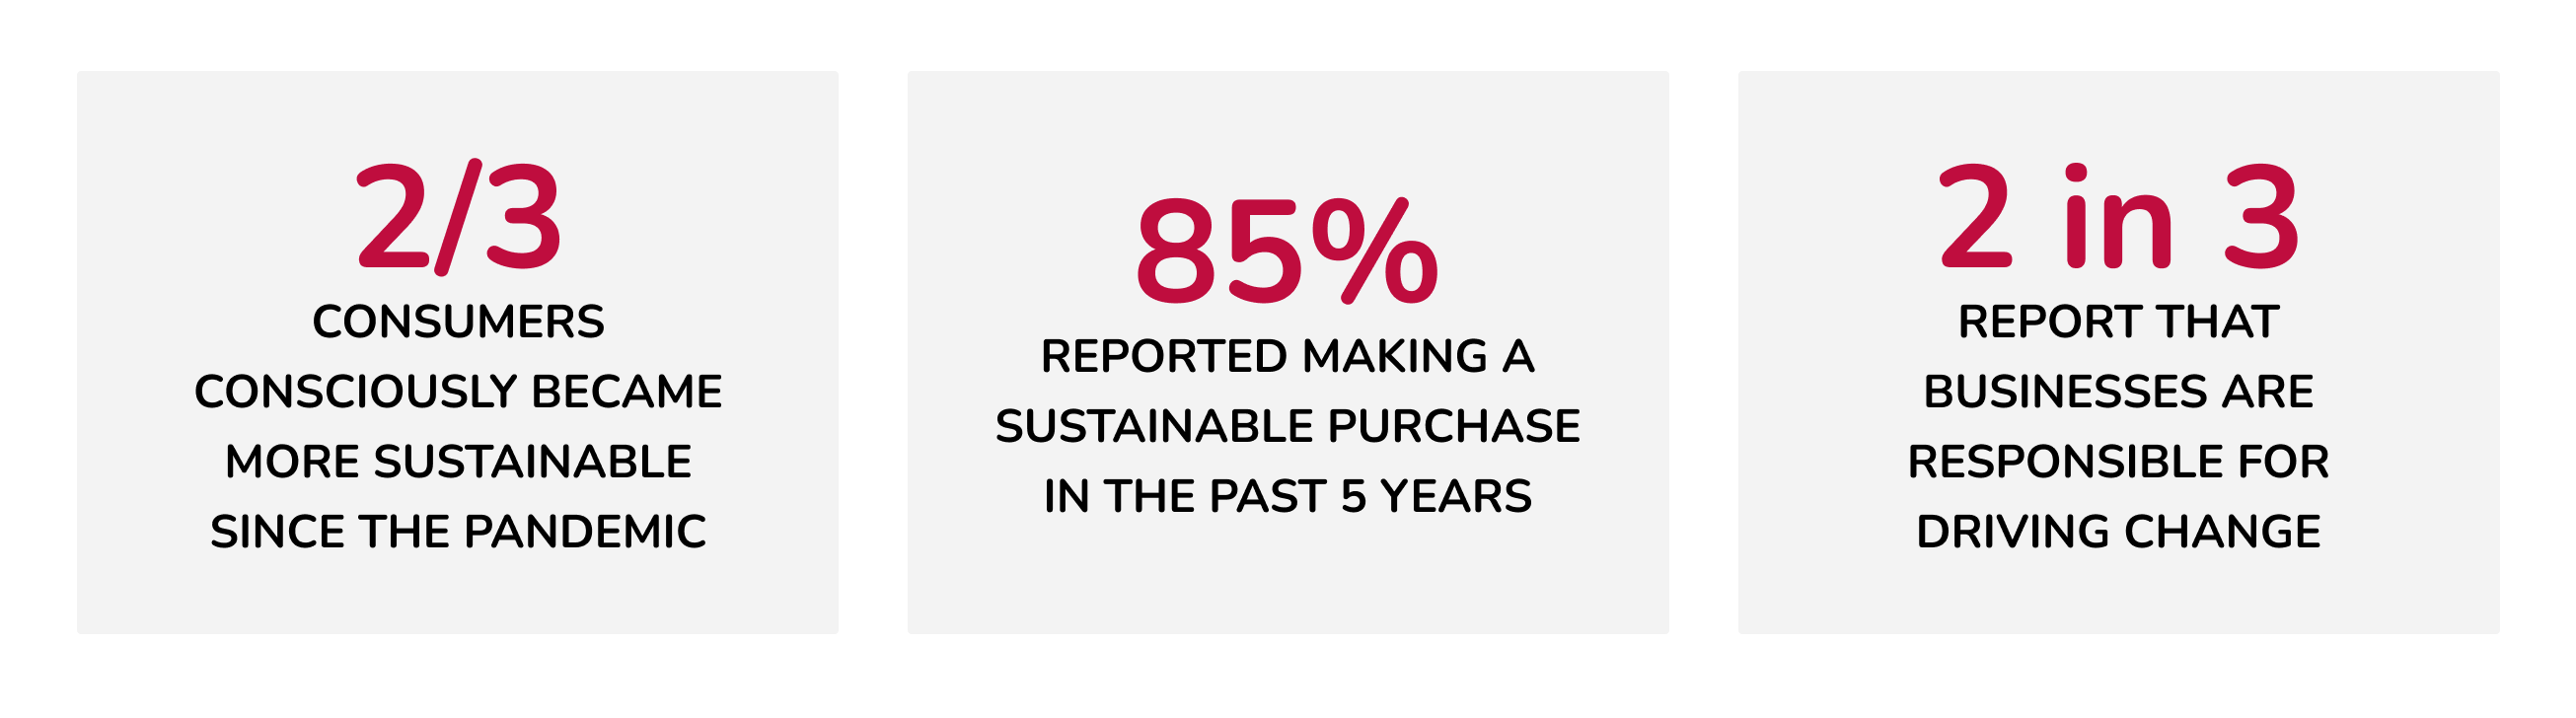 2/3 Consumers consciously became more sustainable since the pandemic; 85% Reported making a sustainable purchase in the past 5 years; 2 in 3 Report that businesses are responsible for driving change